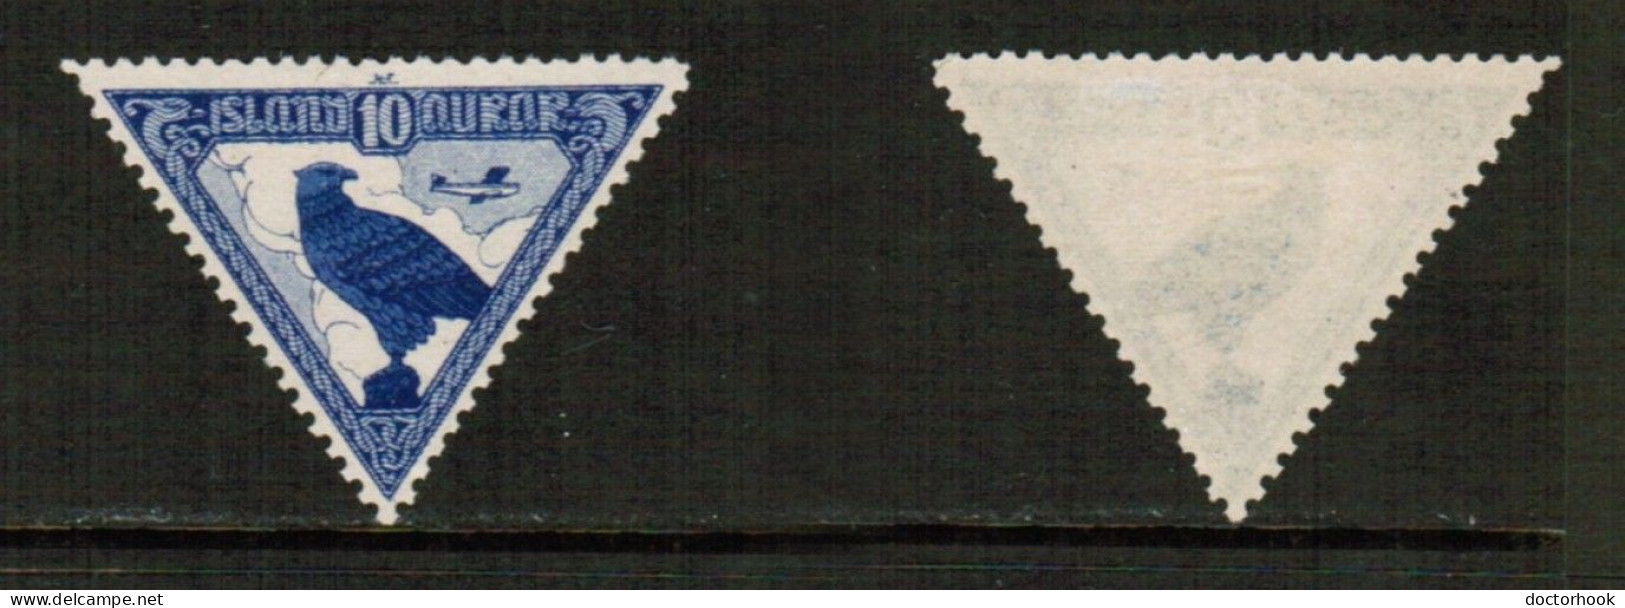 ICELAND   Scott # C 3* MINT HINGED (CONDITION AS PER SCAN) (Stamp Scan # 915-5) - Posta Aerea